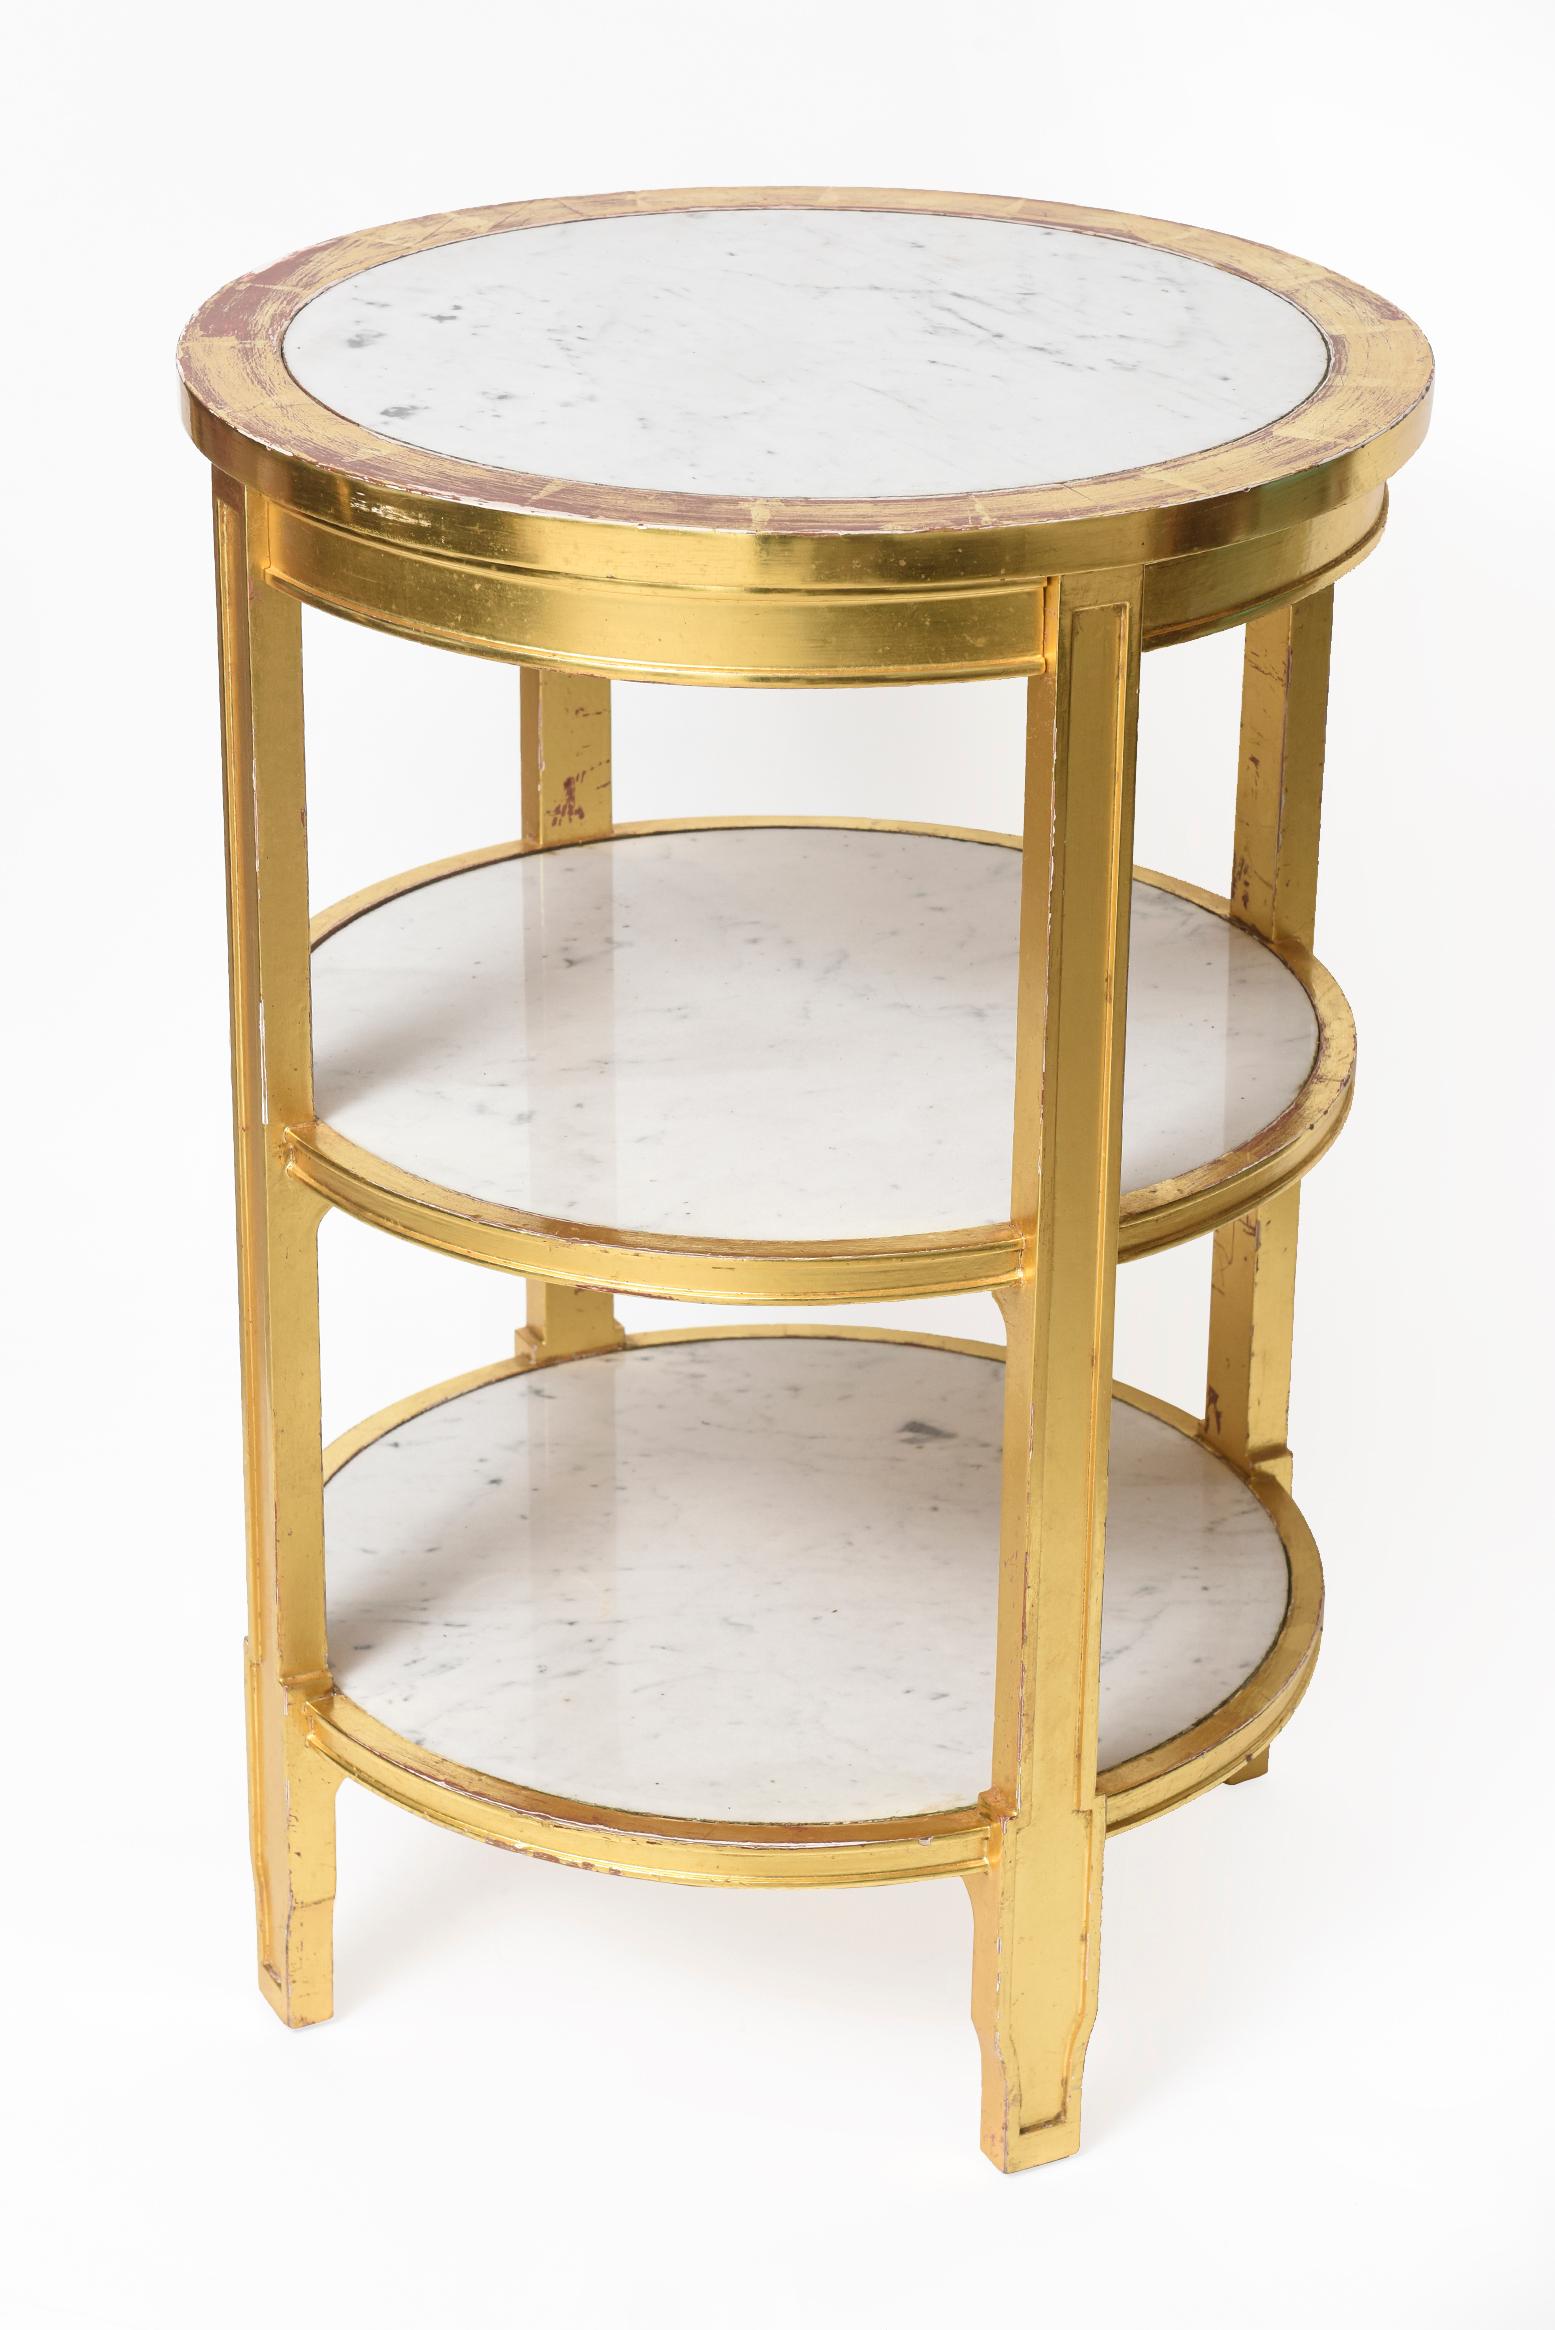 This beautiful tier table is a replica of a piece from Nelson Rockefeller's private collection. In 1937 Jean-Michel Frank designed Nelson Rockefeller’s famed Fifth Avenue apartment. During this time, he created many of his famous pieces. This